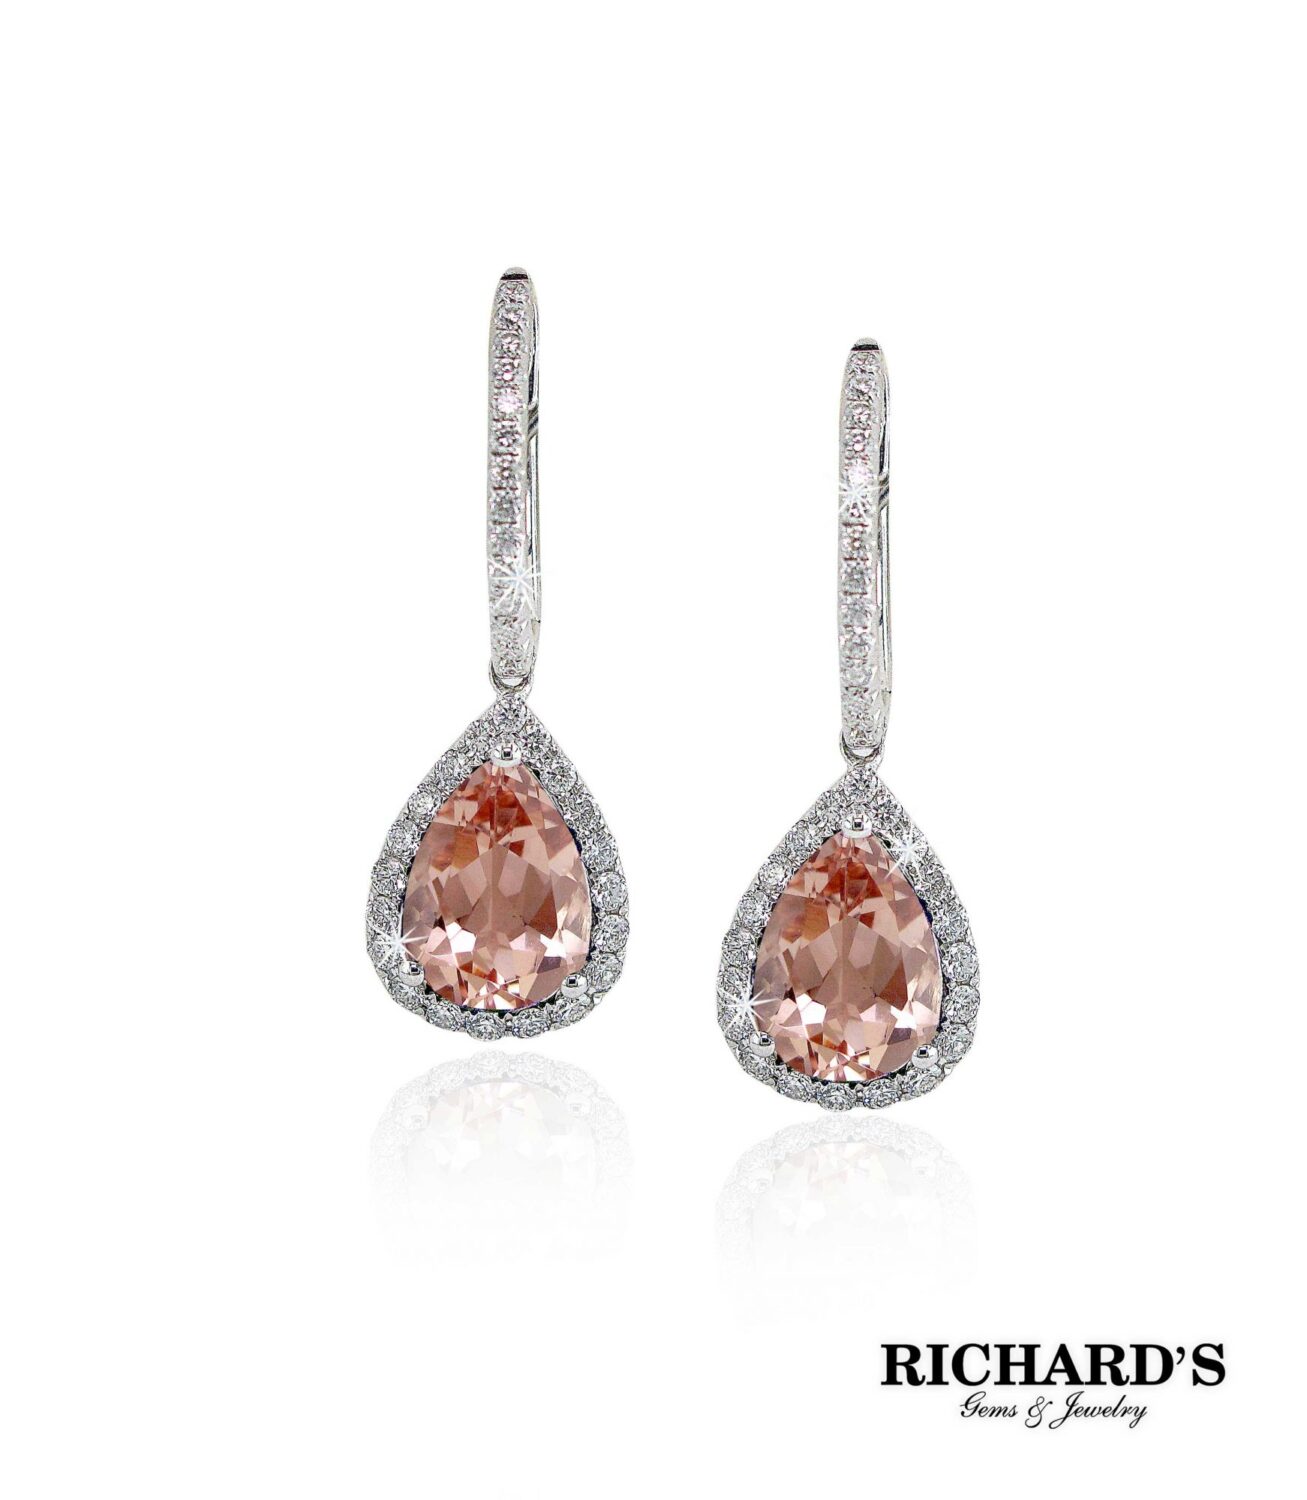 Unheated Pear Pink Morganite 8x6mm Natural 925 Sterling Silver Earrings 